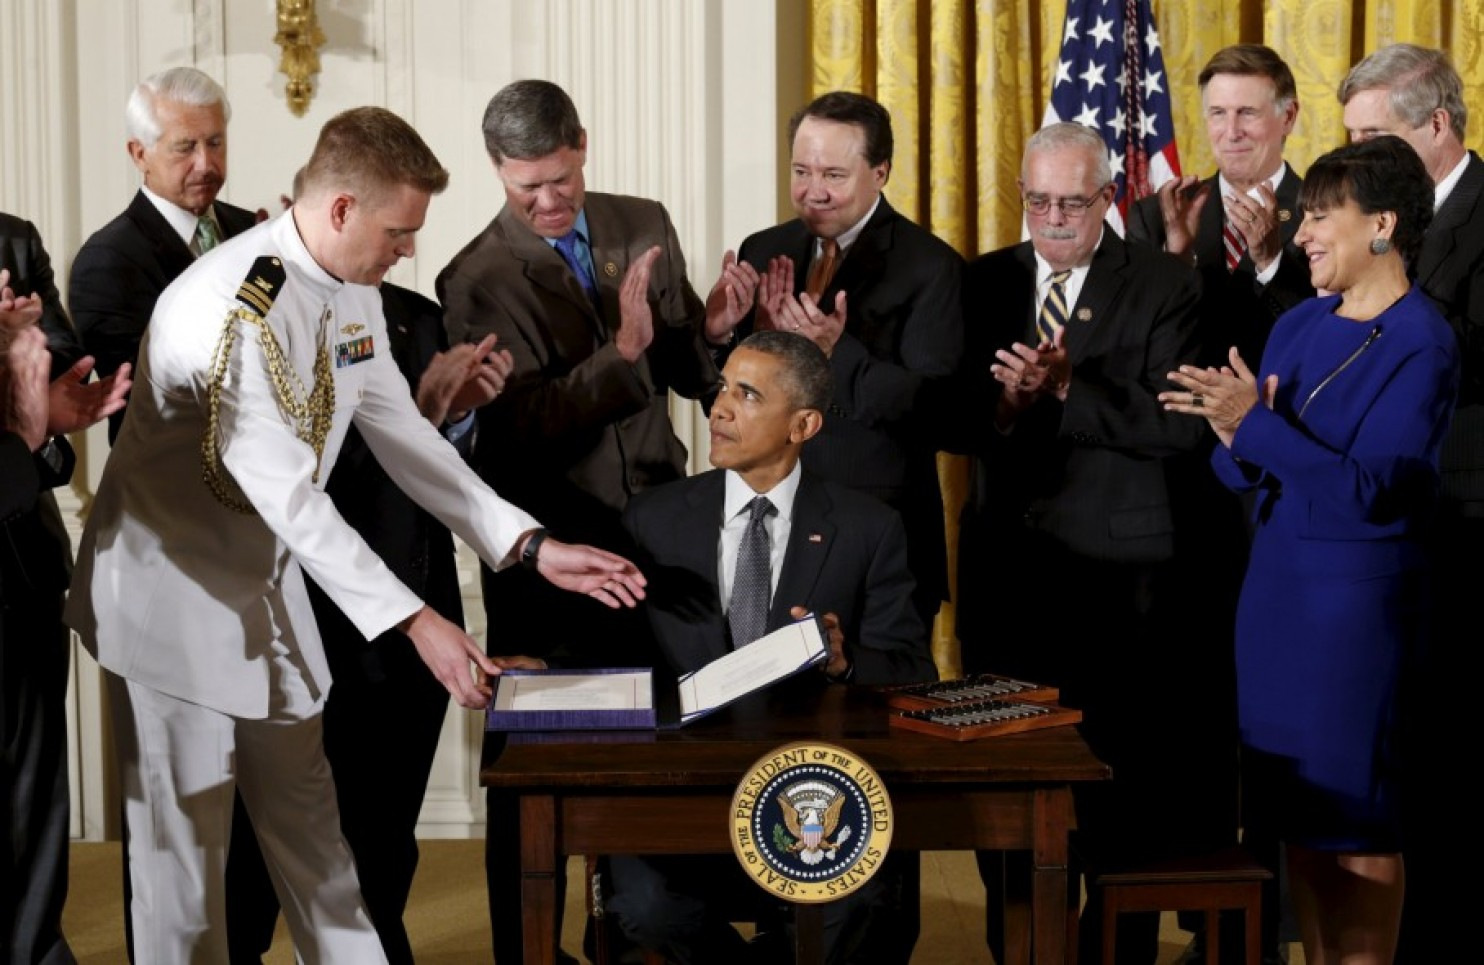 Surrounded by Cabinet officials and members of Congress, President Barack Obama signs H.R. 2146, which sandwiched in other measures, provided a 'fast track; to implementing the TPP. (AP Photo/Carolyn Kaster)